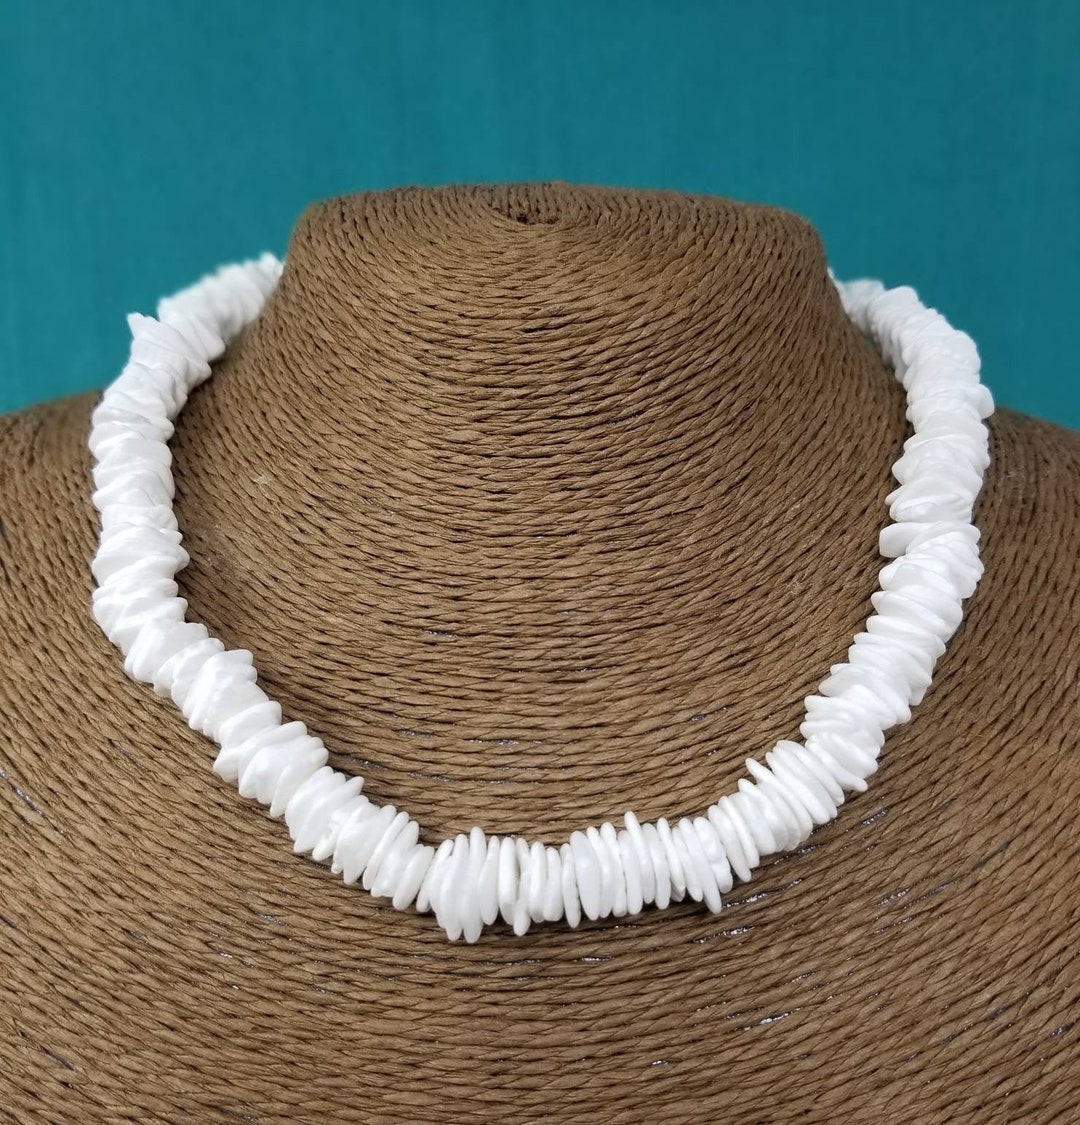 Puka shell necklaces are back, thanks to VSCO girls and nostalgia - Vox